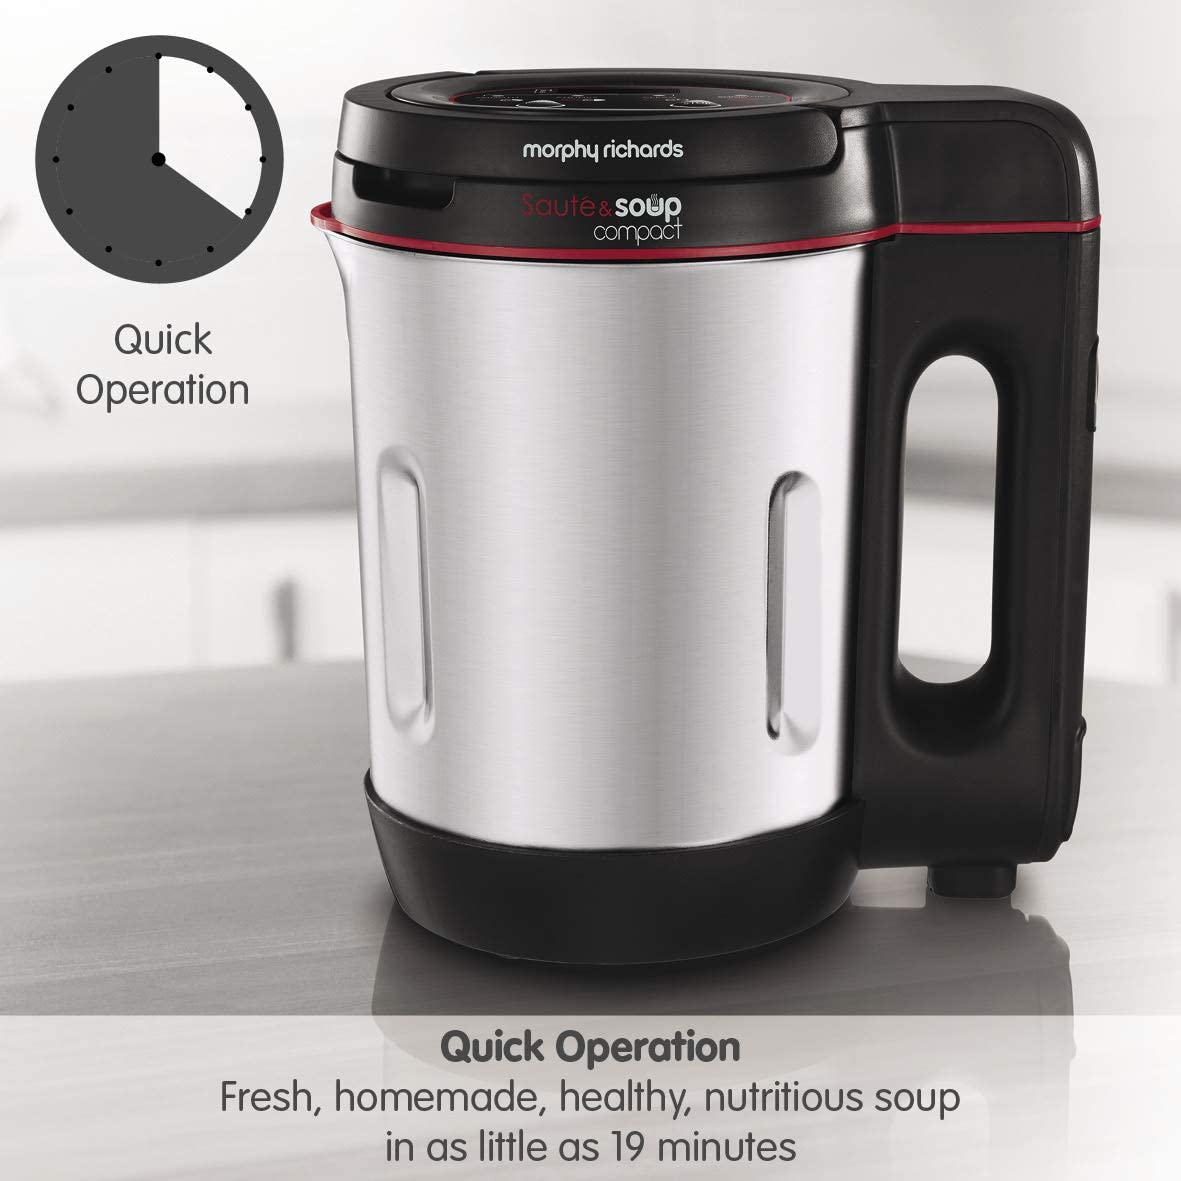 https://cunniffeelectric.ie/wp-content/uploads/2022/12/morphy-richards-saute-soup-maker-501027-4.jpg